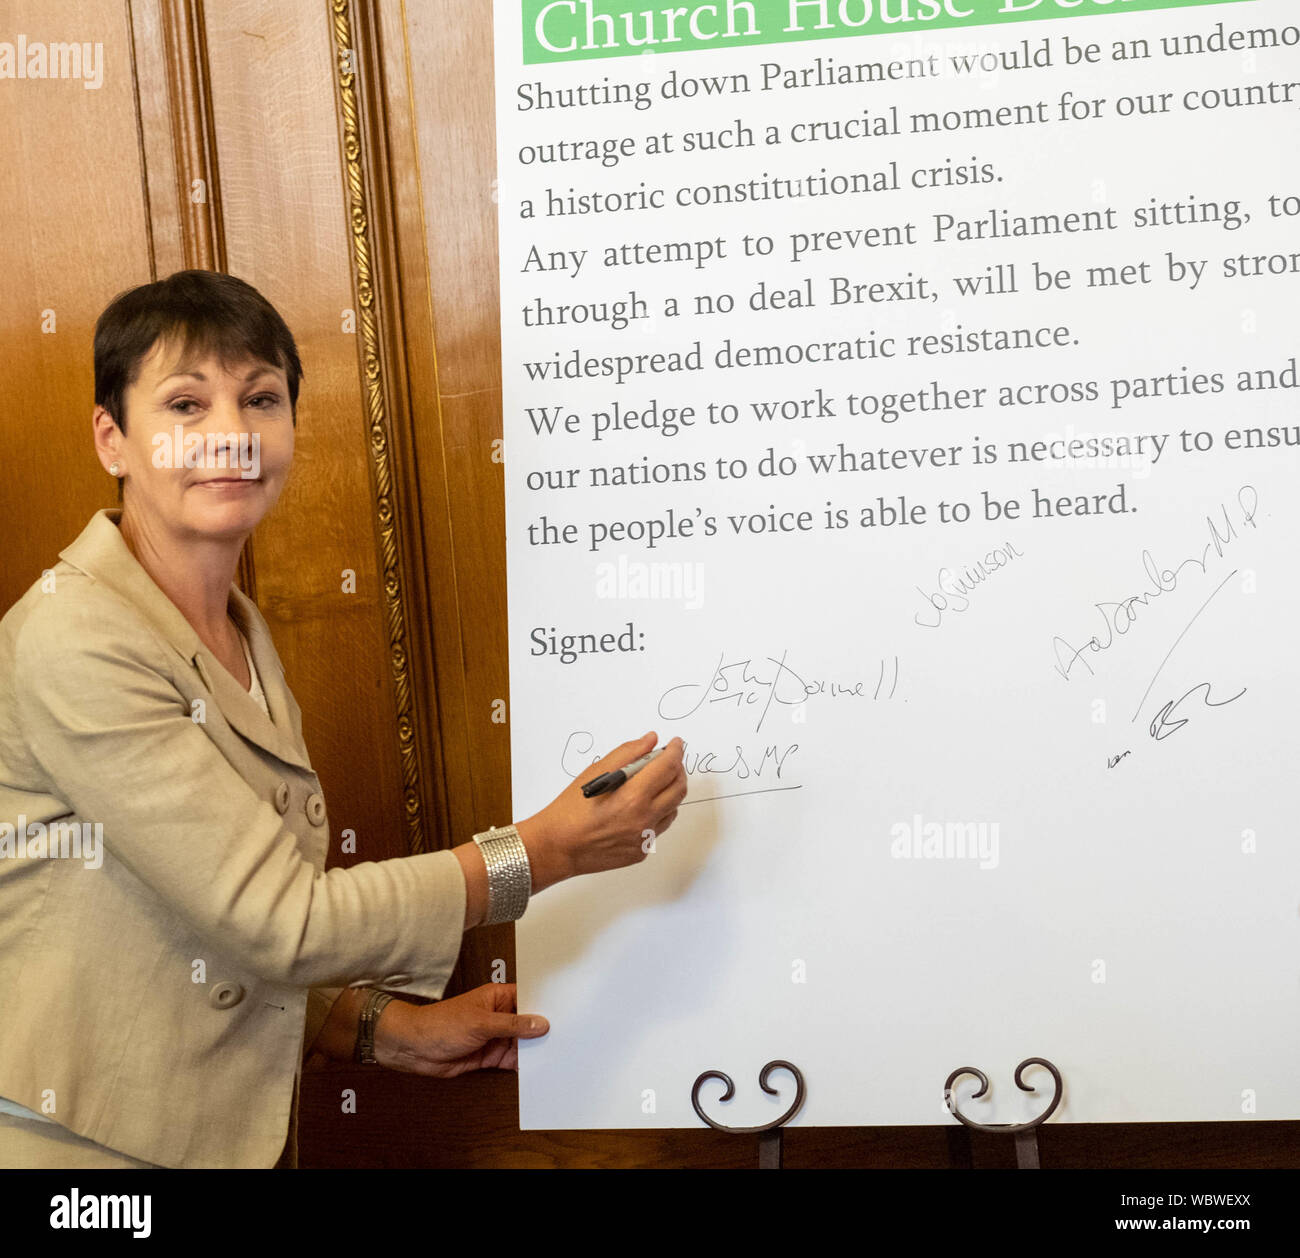 London, UK. 27 August 2019.  Church House declaration meeting of UK opposition leaders and MP's signing a declaration against the shutting down of parliament by Boris Johnson MP PC Prime Minister. Caroline Lucas, the only Green Party MP sighs the Declaration  Credit Ian DavidsonAlamy Live News Stock Photo